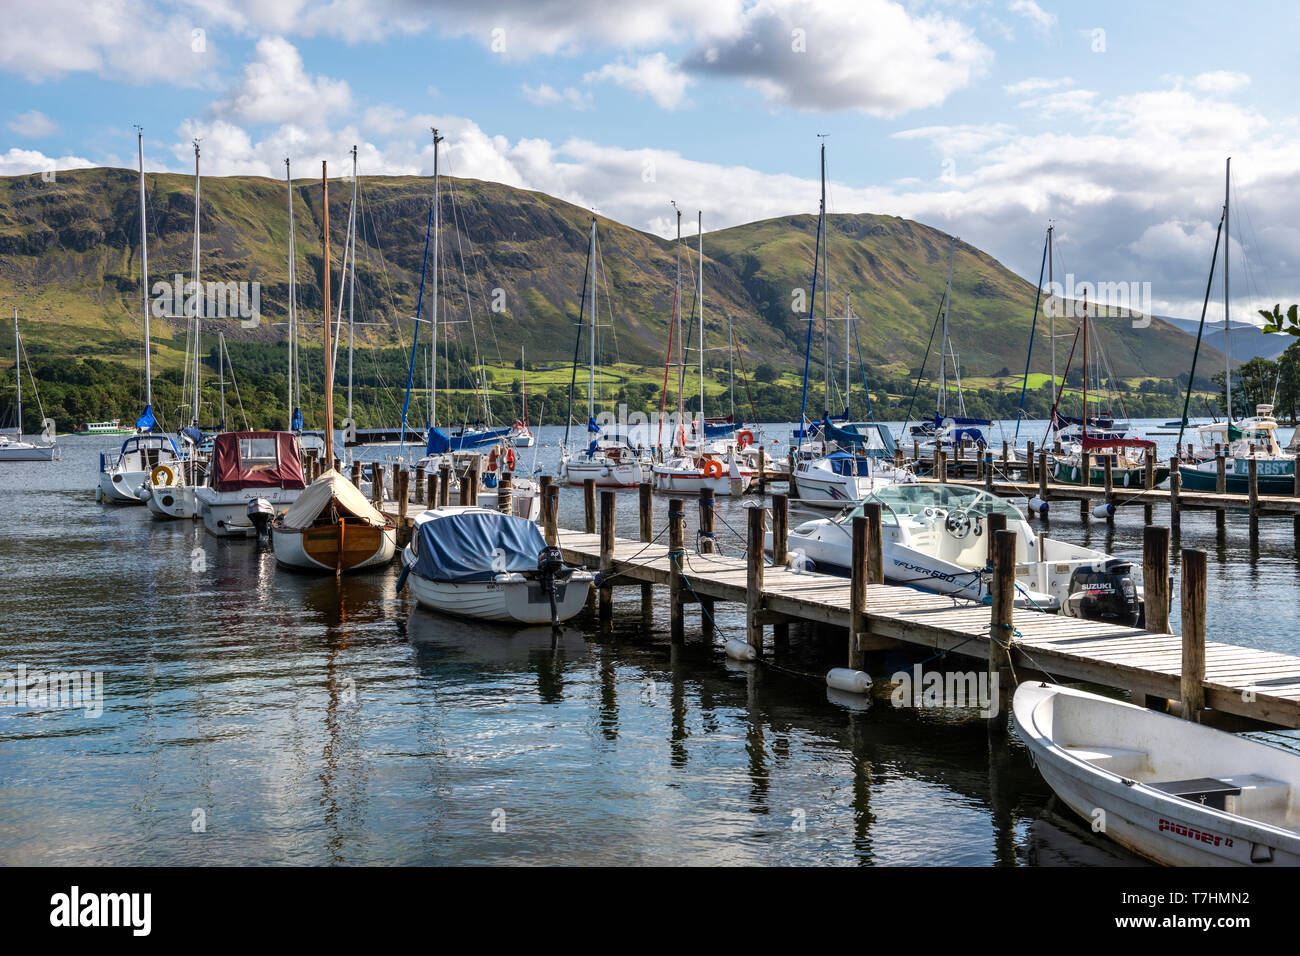 Yachts moored on pontoons at Fair Field Marina on Ullswater in the Lake District National Park, Cumbria, England, UK Stock Photo